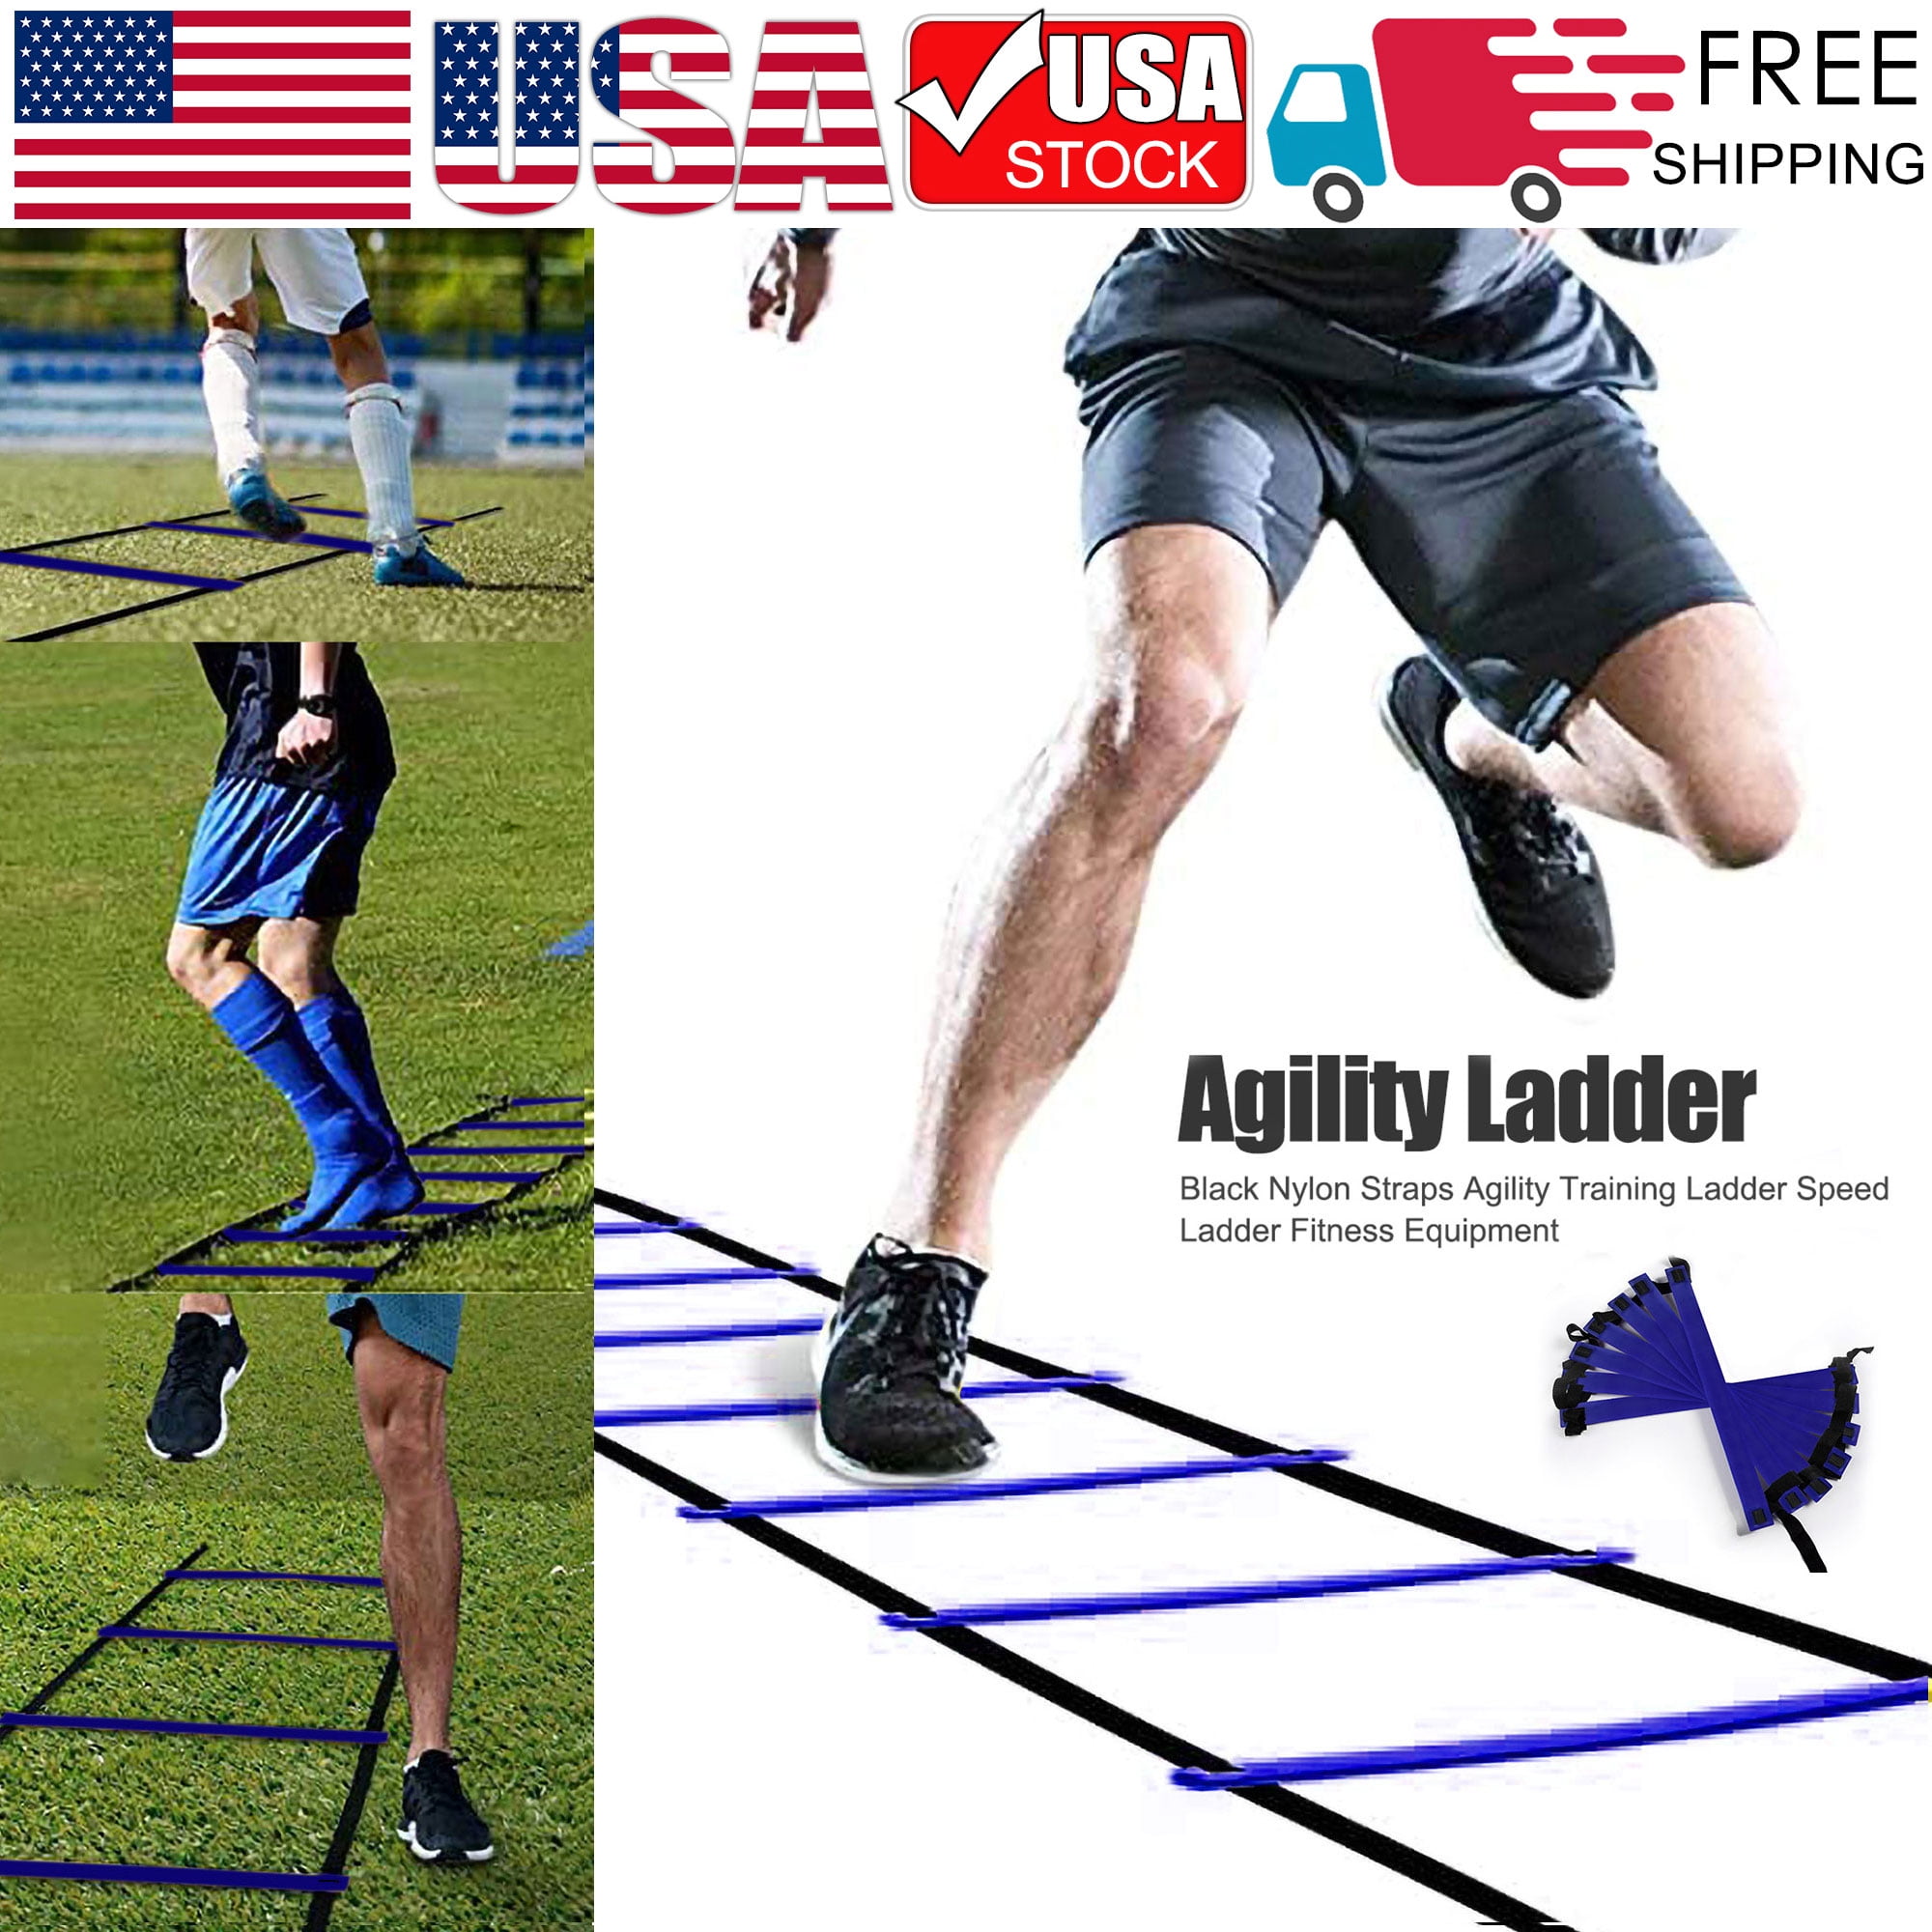 Agility Speed Training Ladder 11 Rung Footwork Fitness Football Workout Exercise 